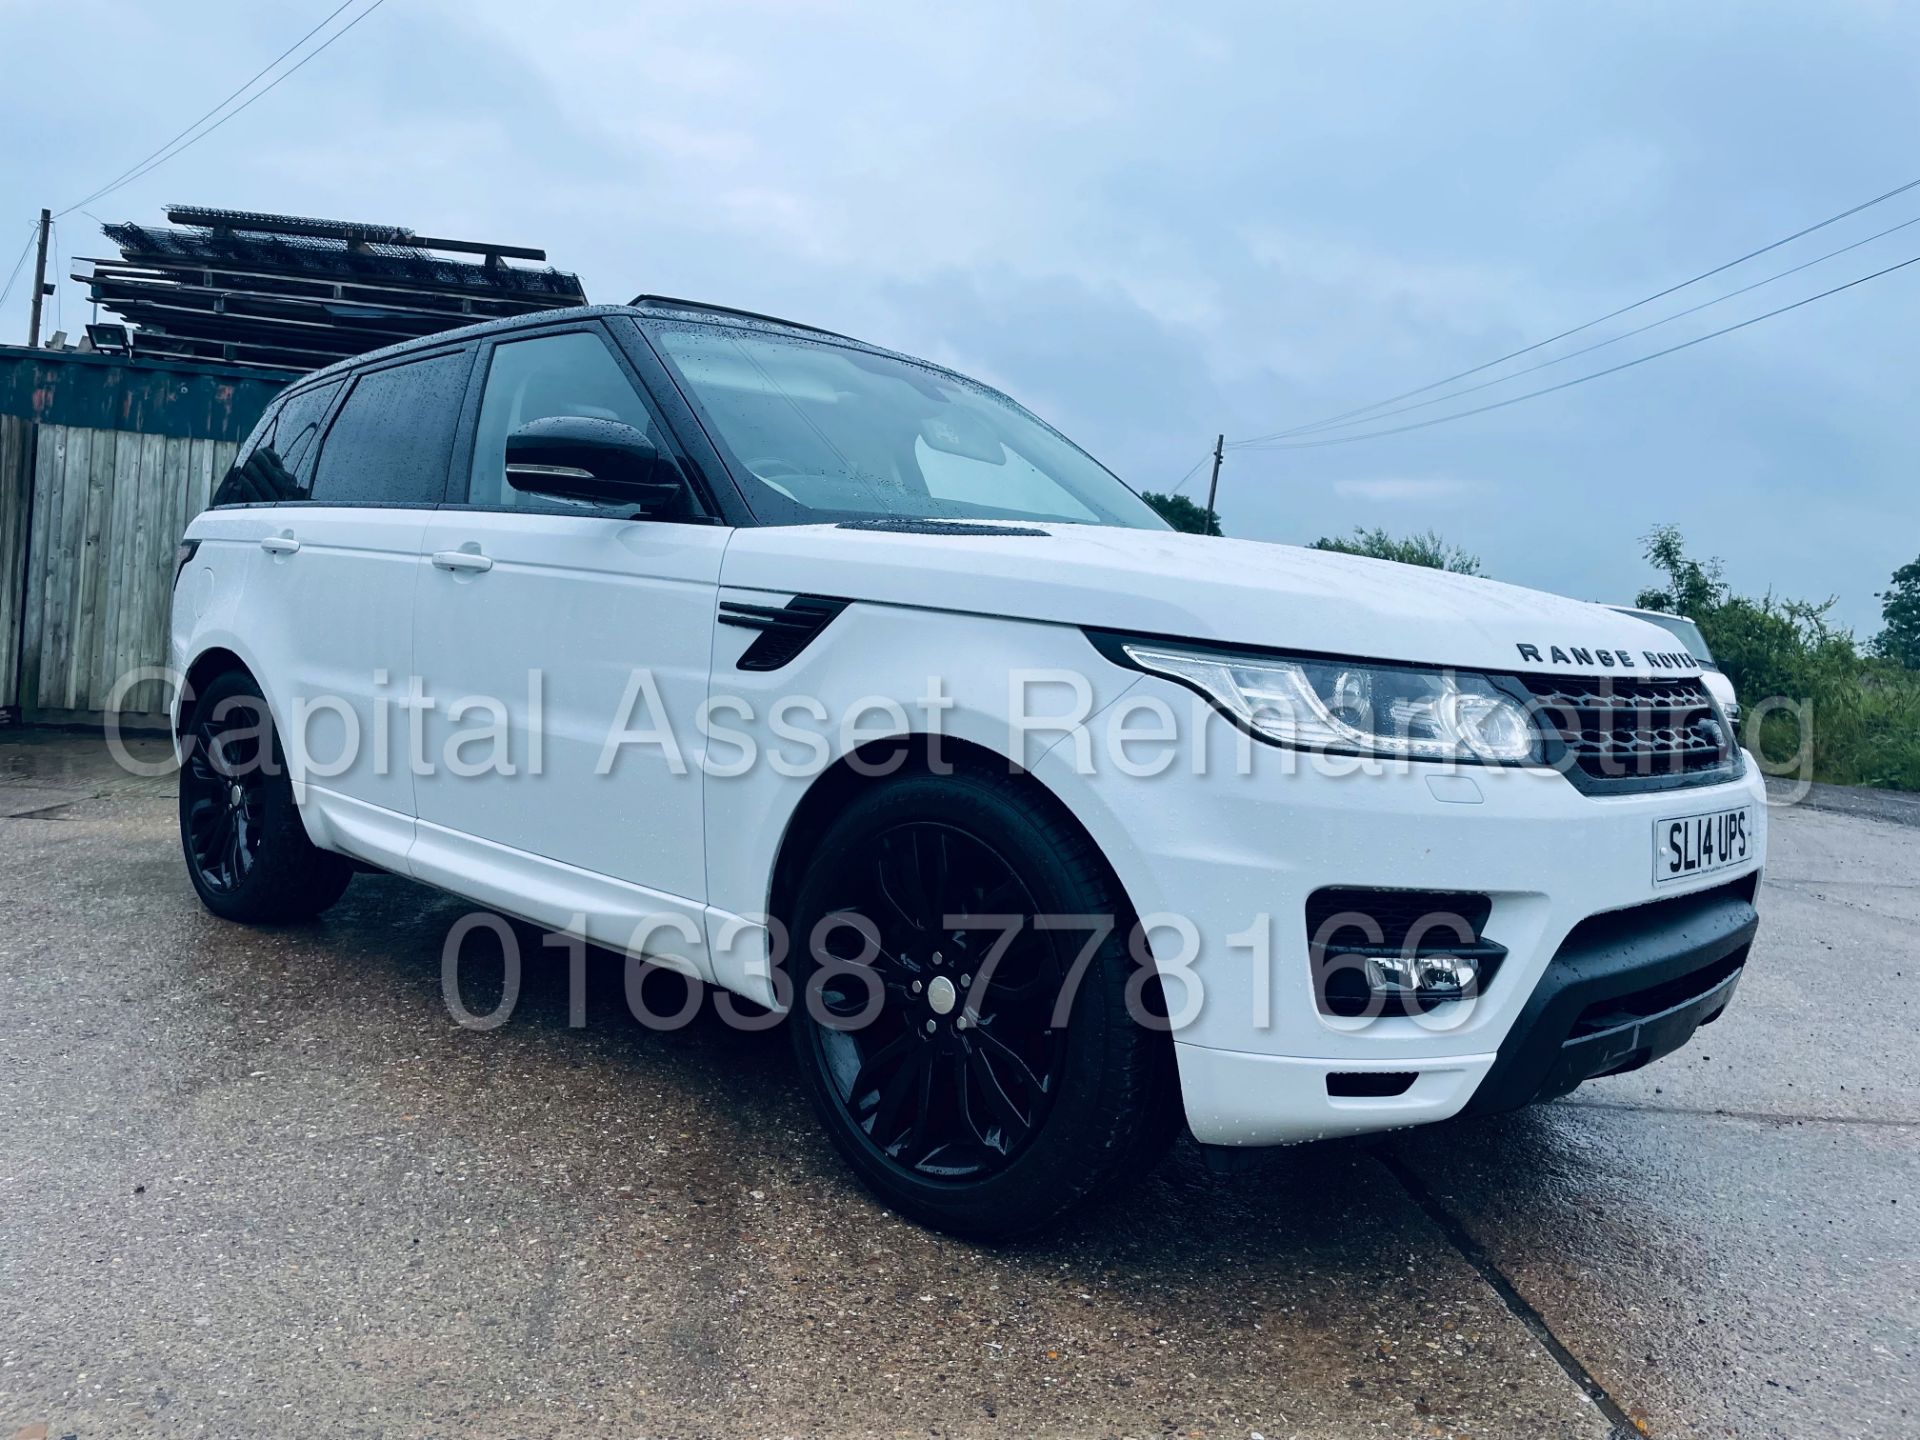 On Sale RANGE ROVER SPORT *SPECIAL EDITION* (2014) '3.0 TDV6 - AUTO' *SAT NAV & PAN ROOF* (TOP SPEC) - Image 13 of 54